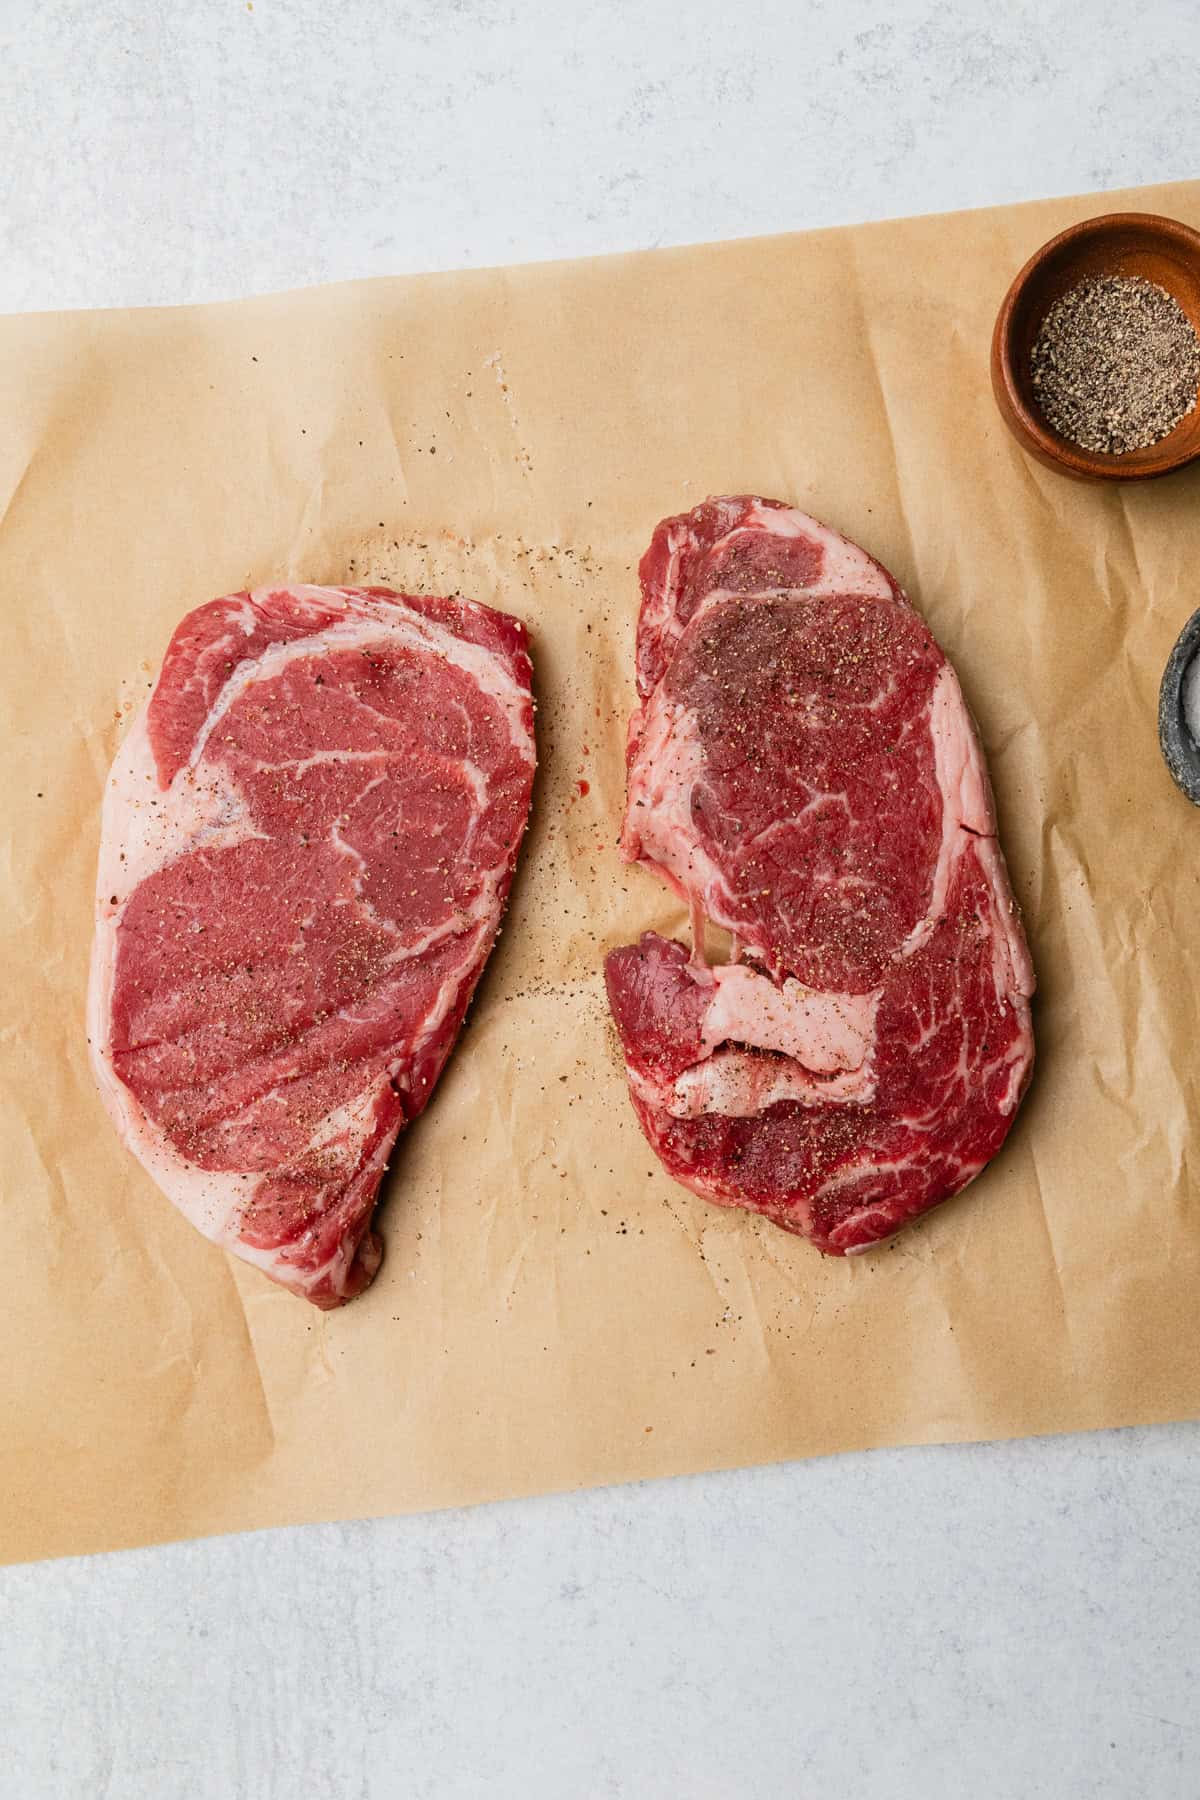 ribeyes at room temperature on a counter.